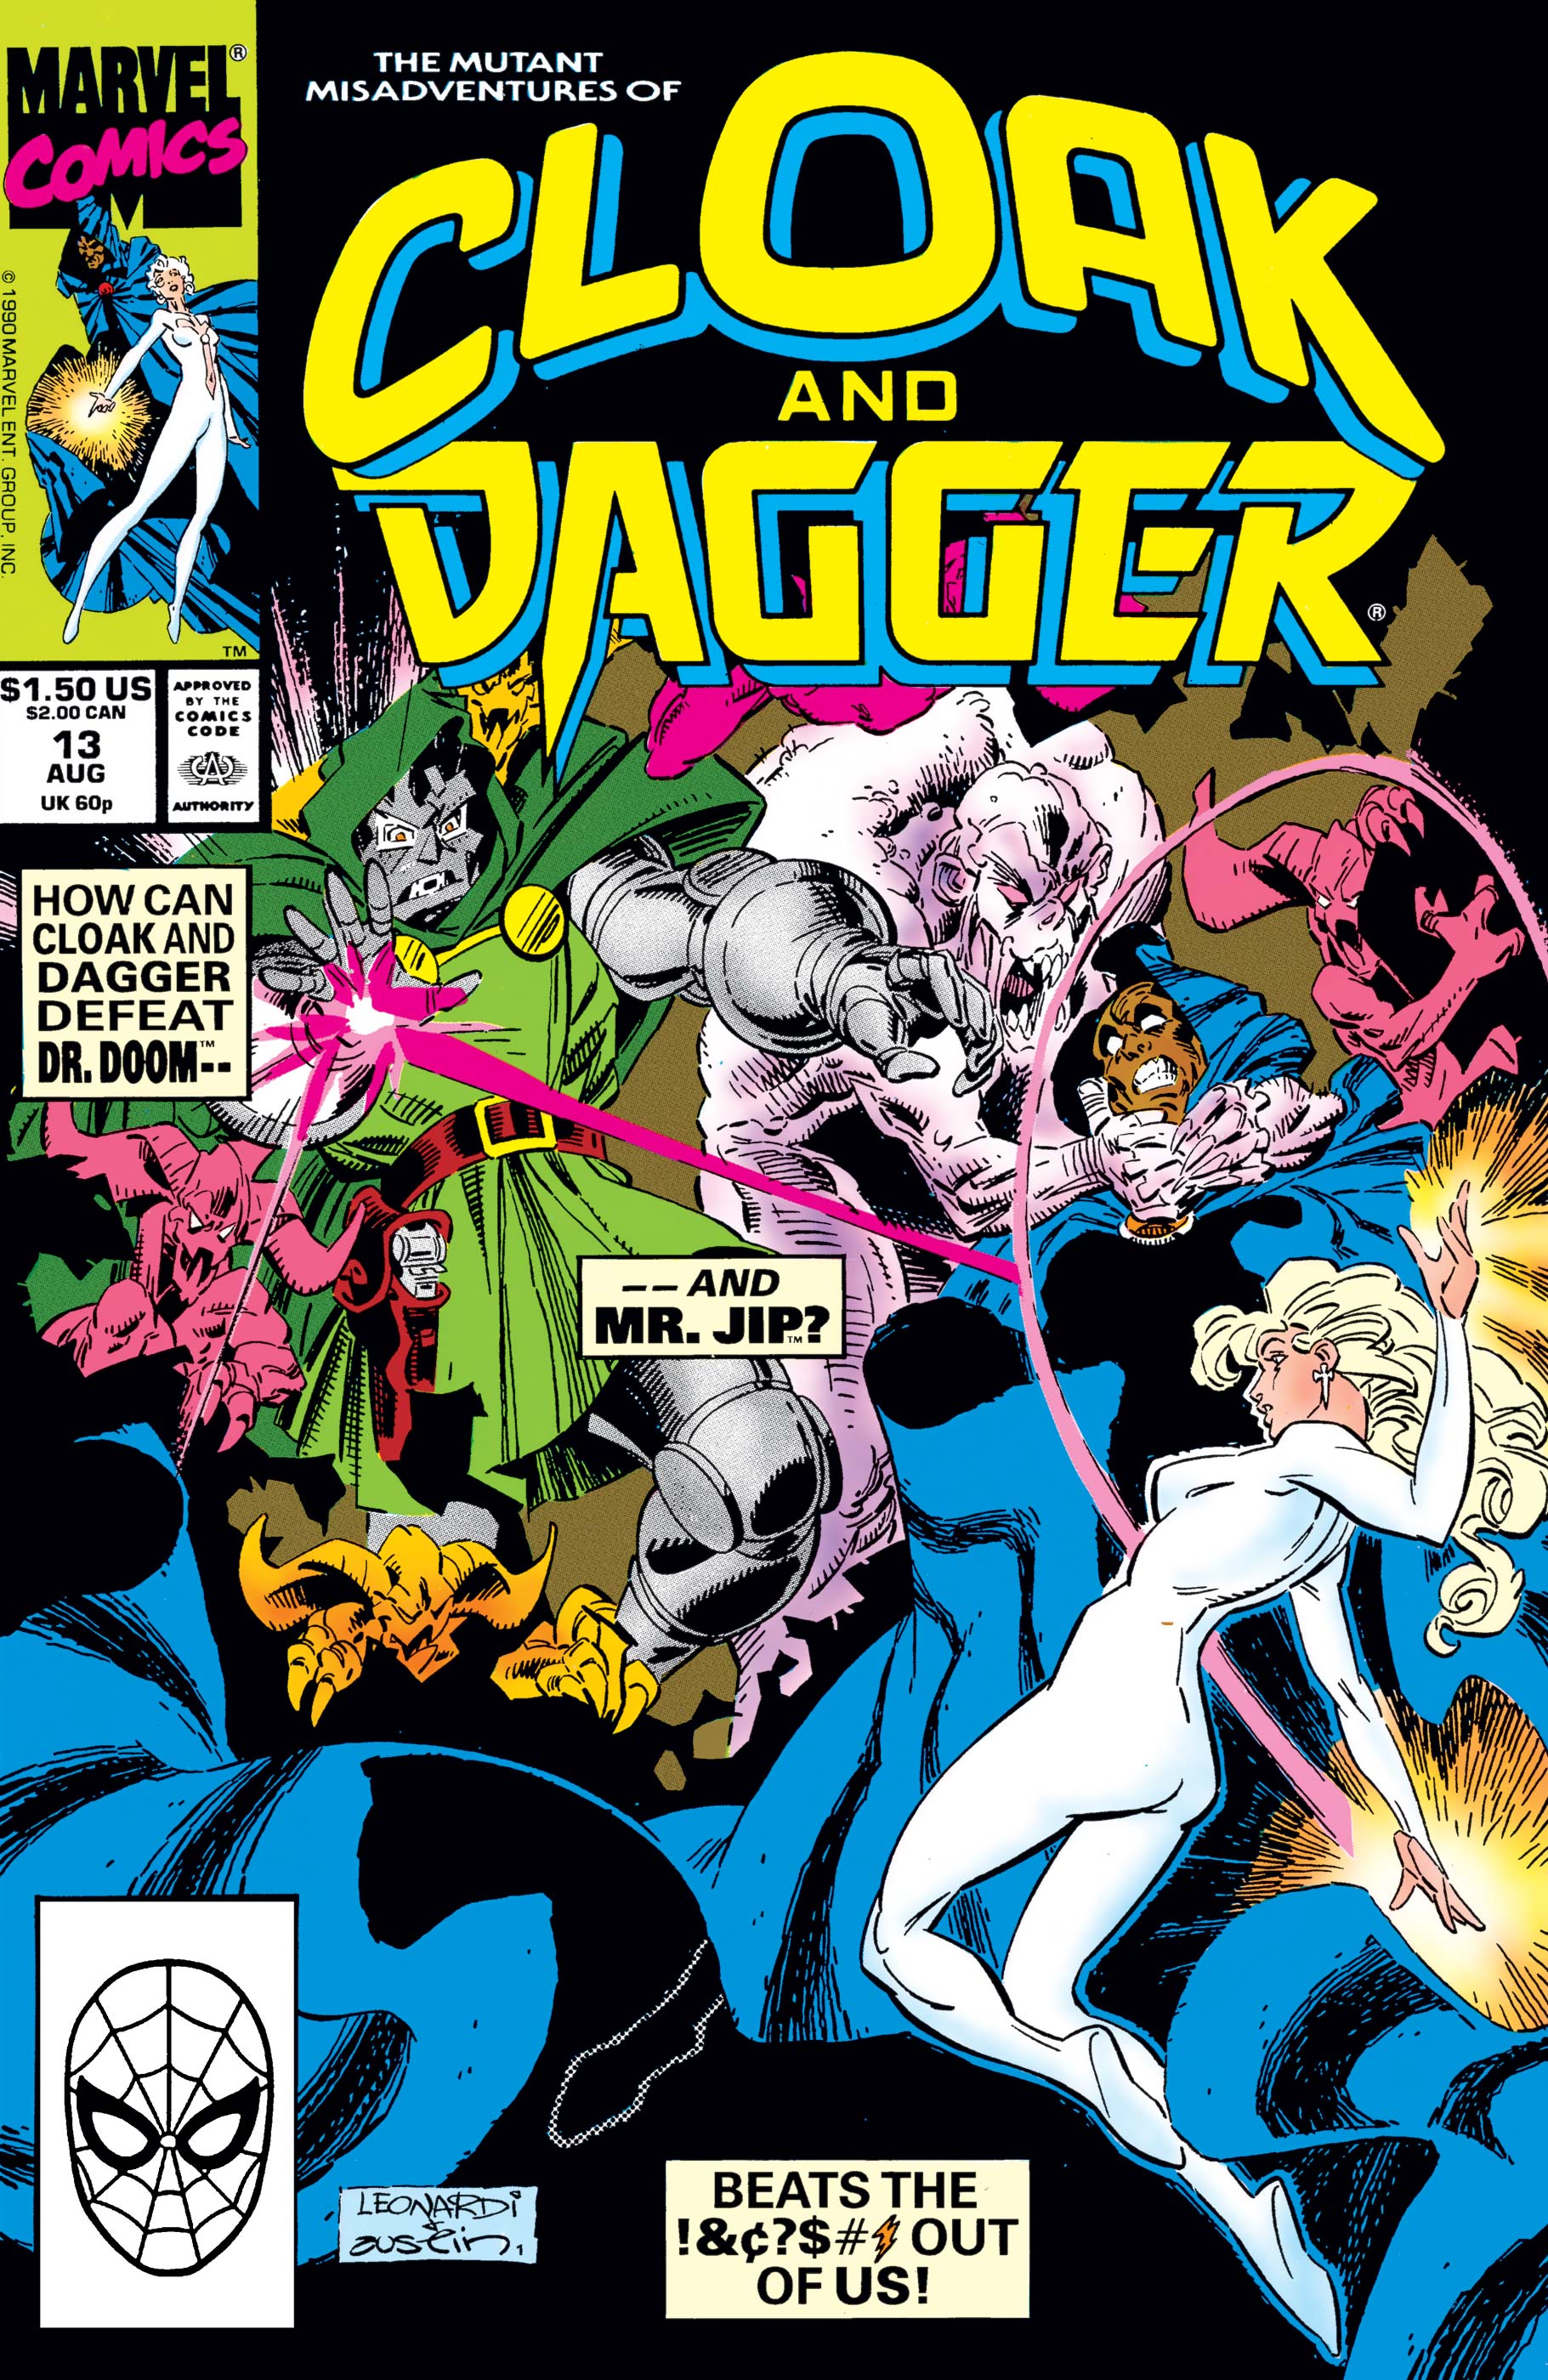 The Mutant Misadventures of Cloak and Dagger (1988) #13